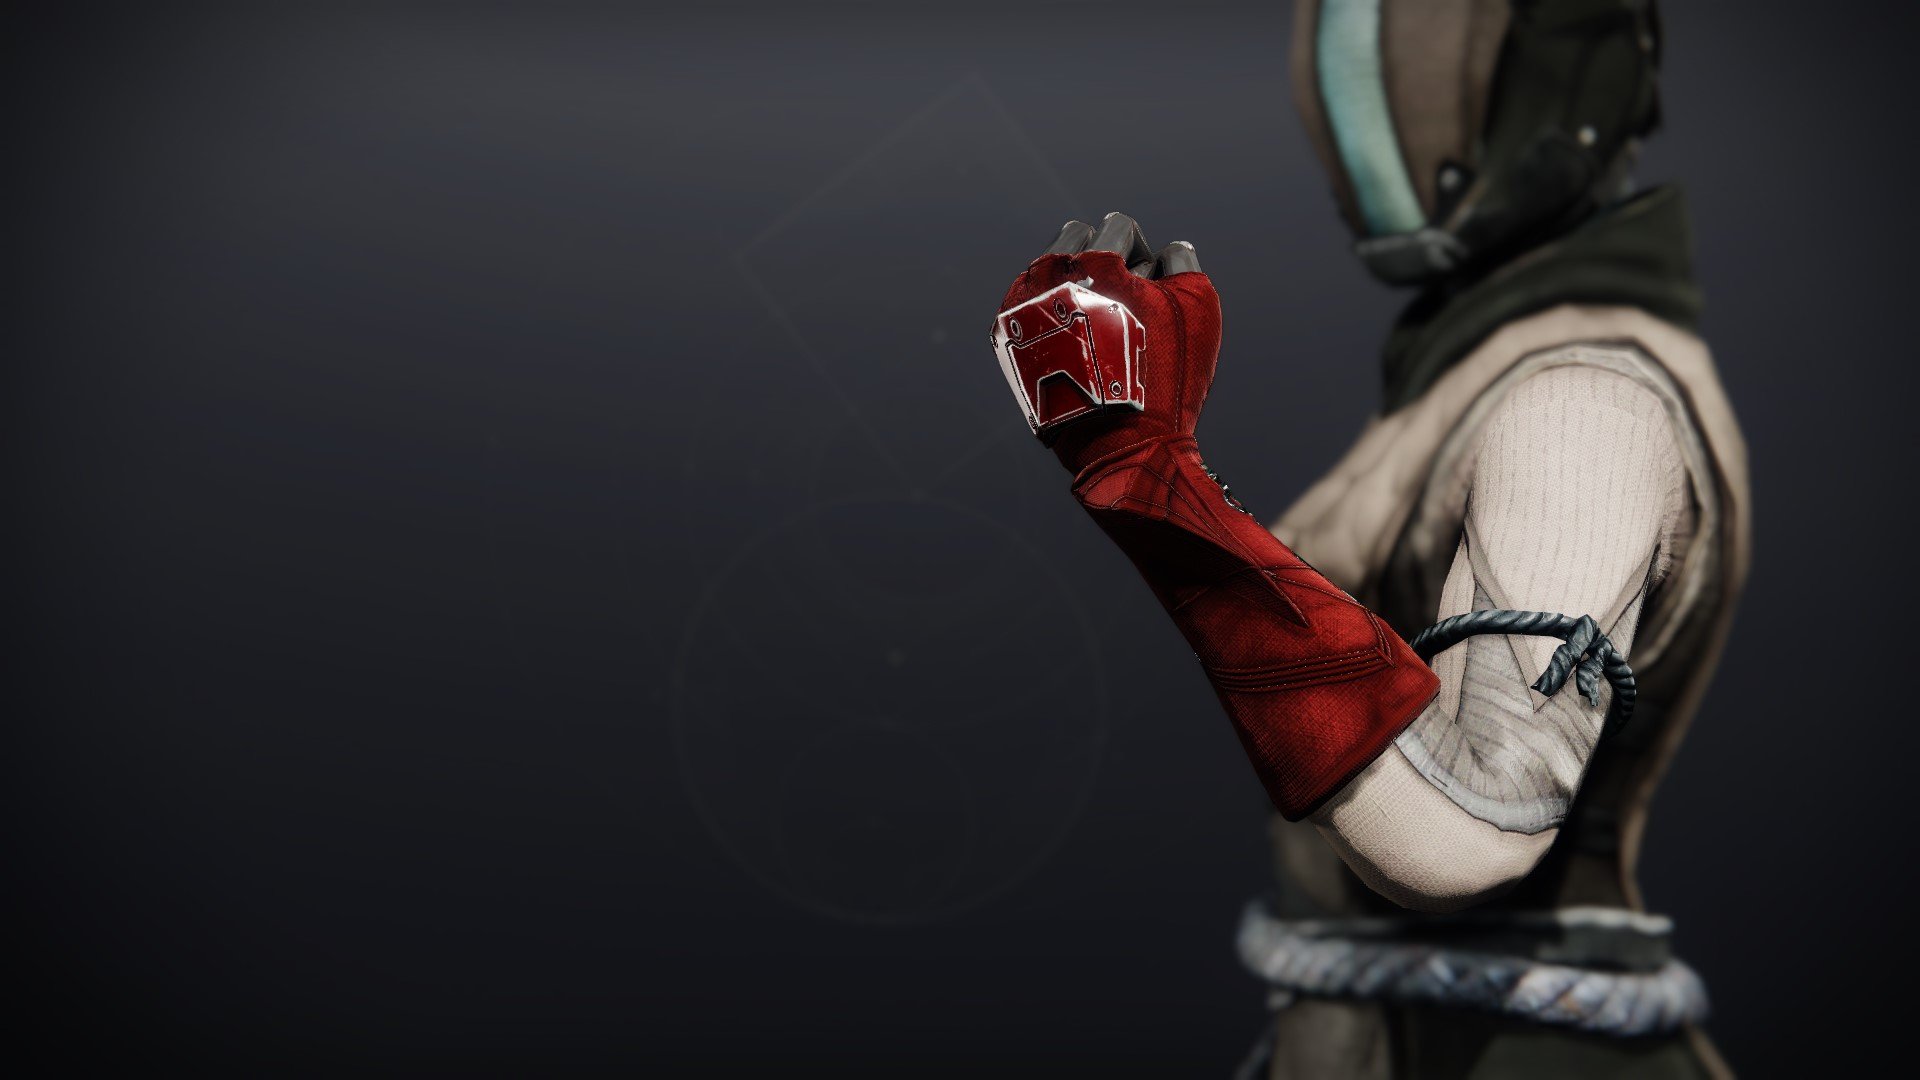 An in-game render of the Resonant Fury Gloves.